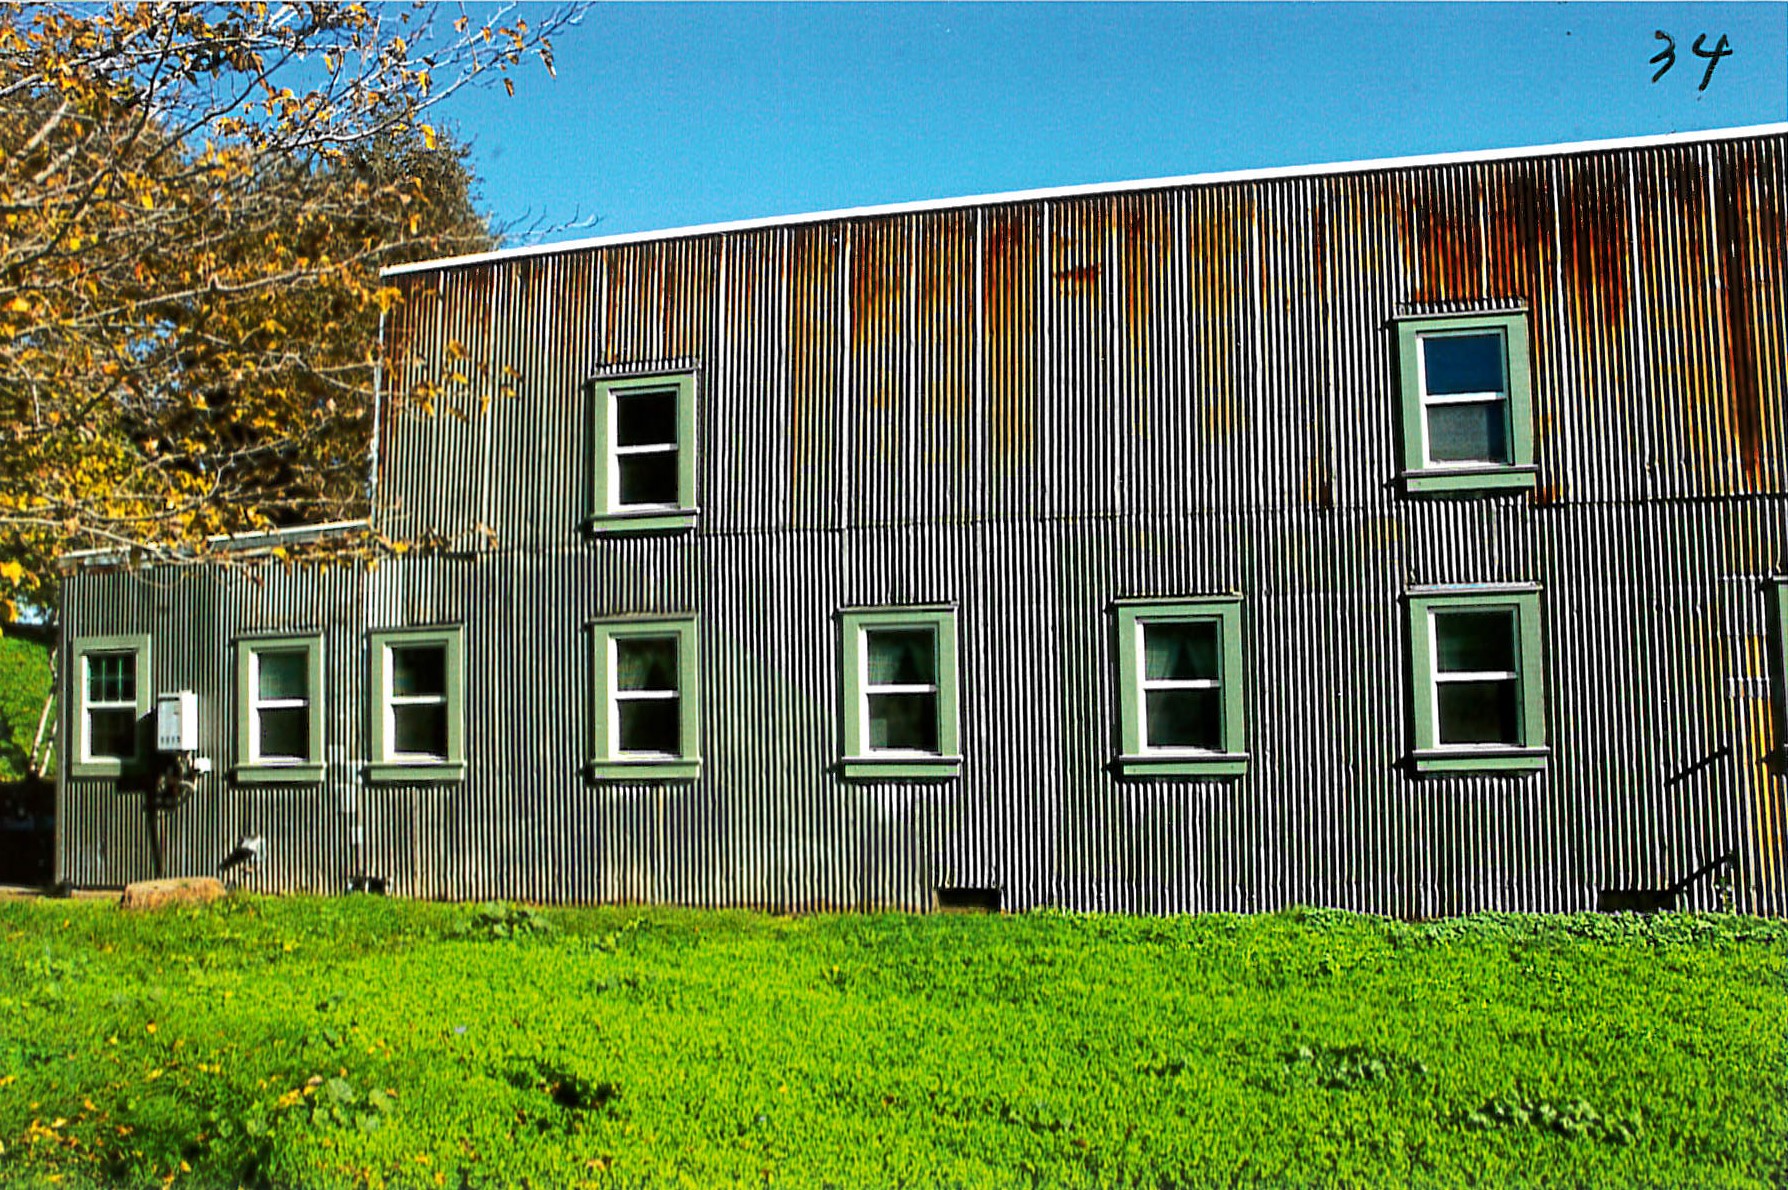 Renovated exterior, matching siding with weathered effect